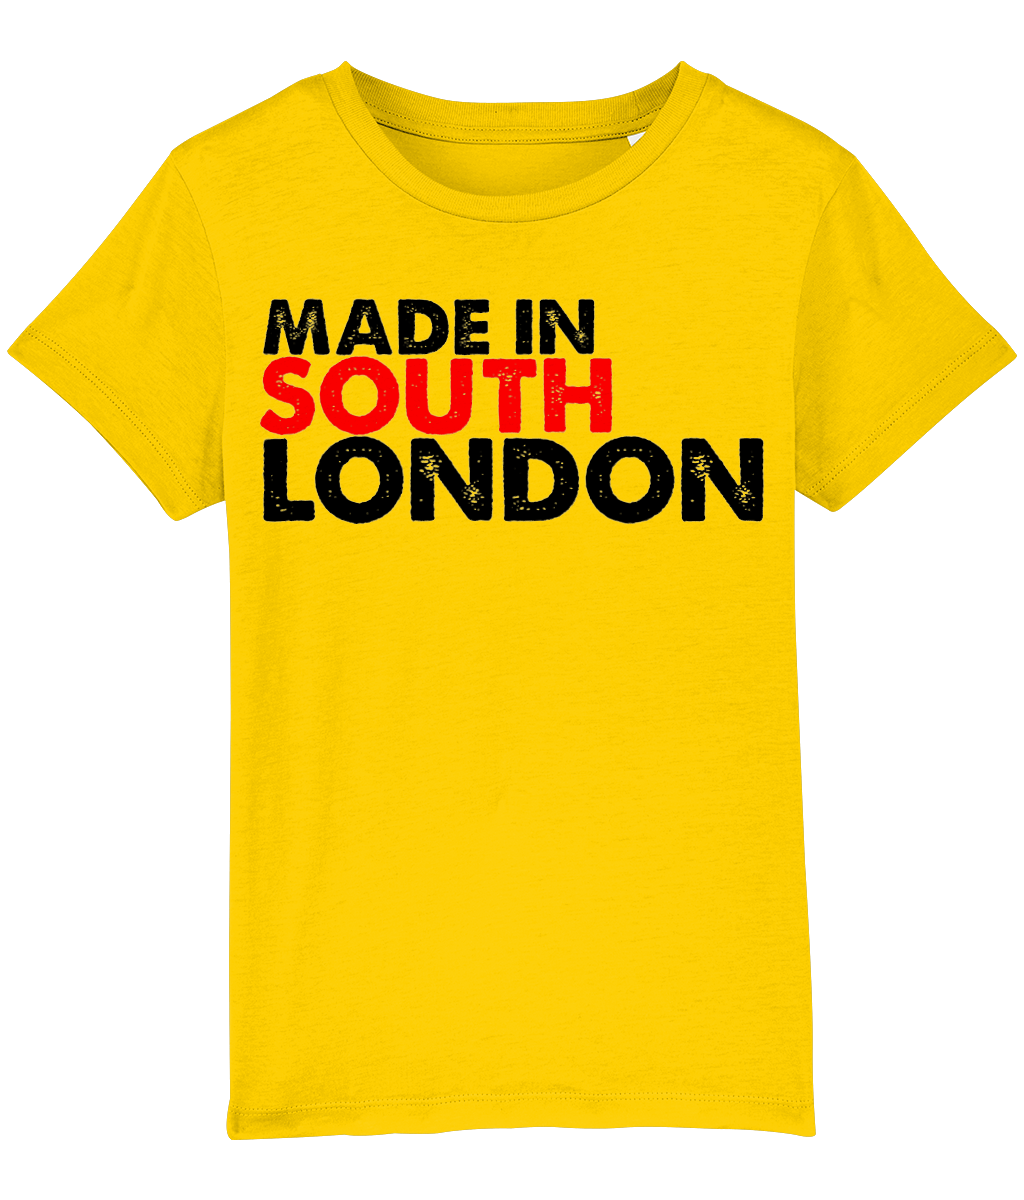 Made in South London Kids T-Shirt